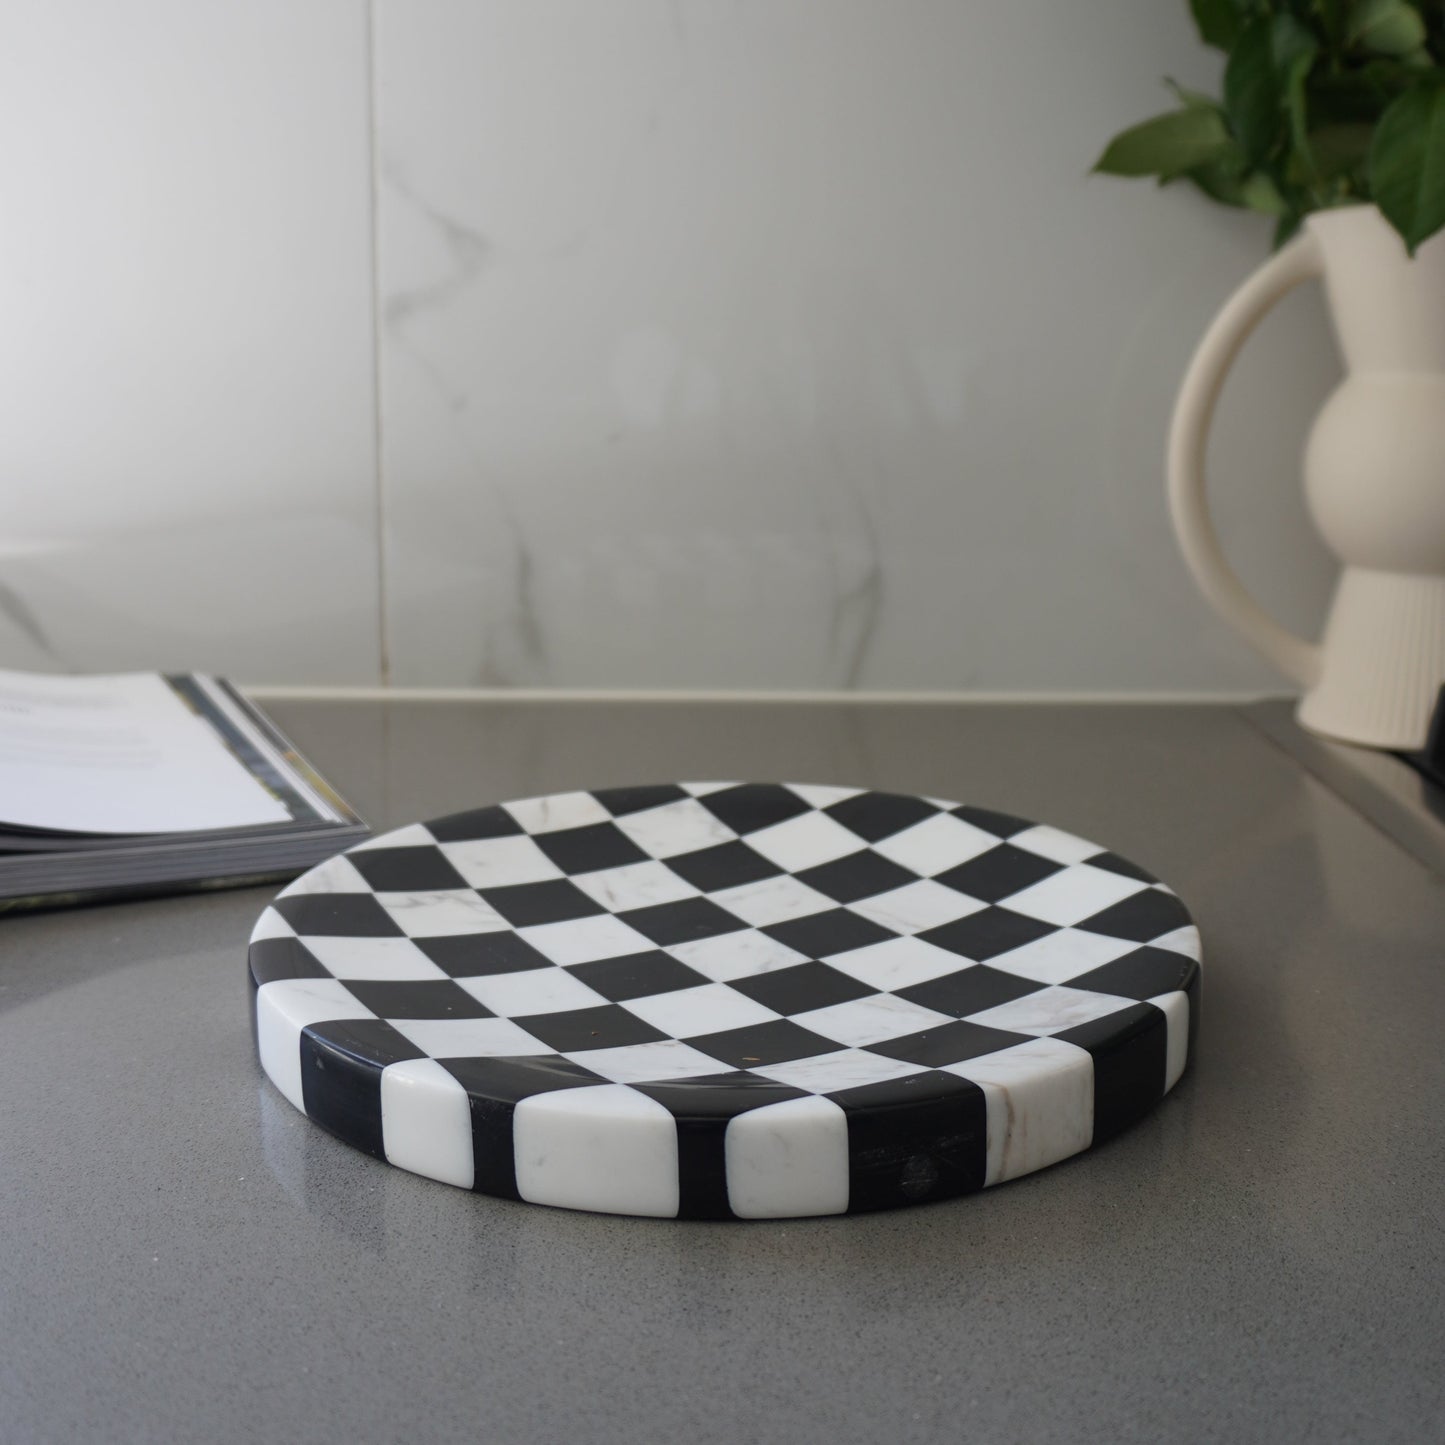 Gatsby Checkered Concave Platter/Tray